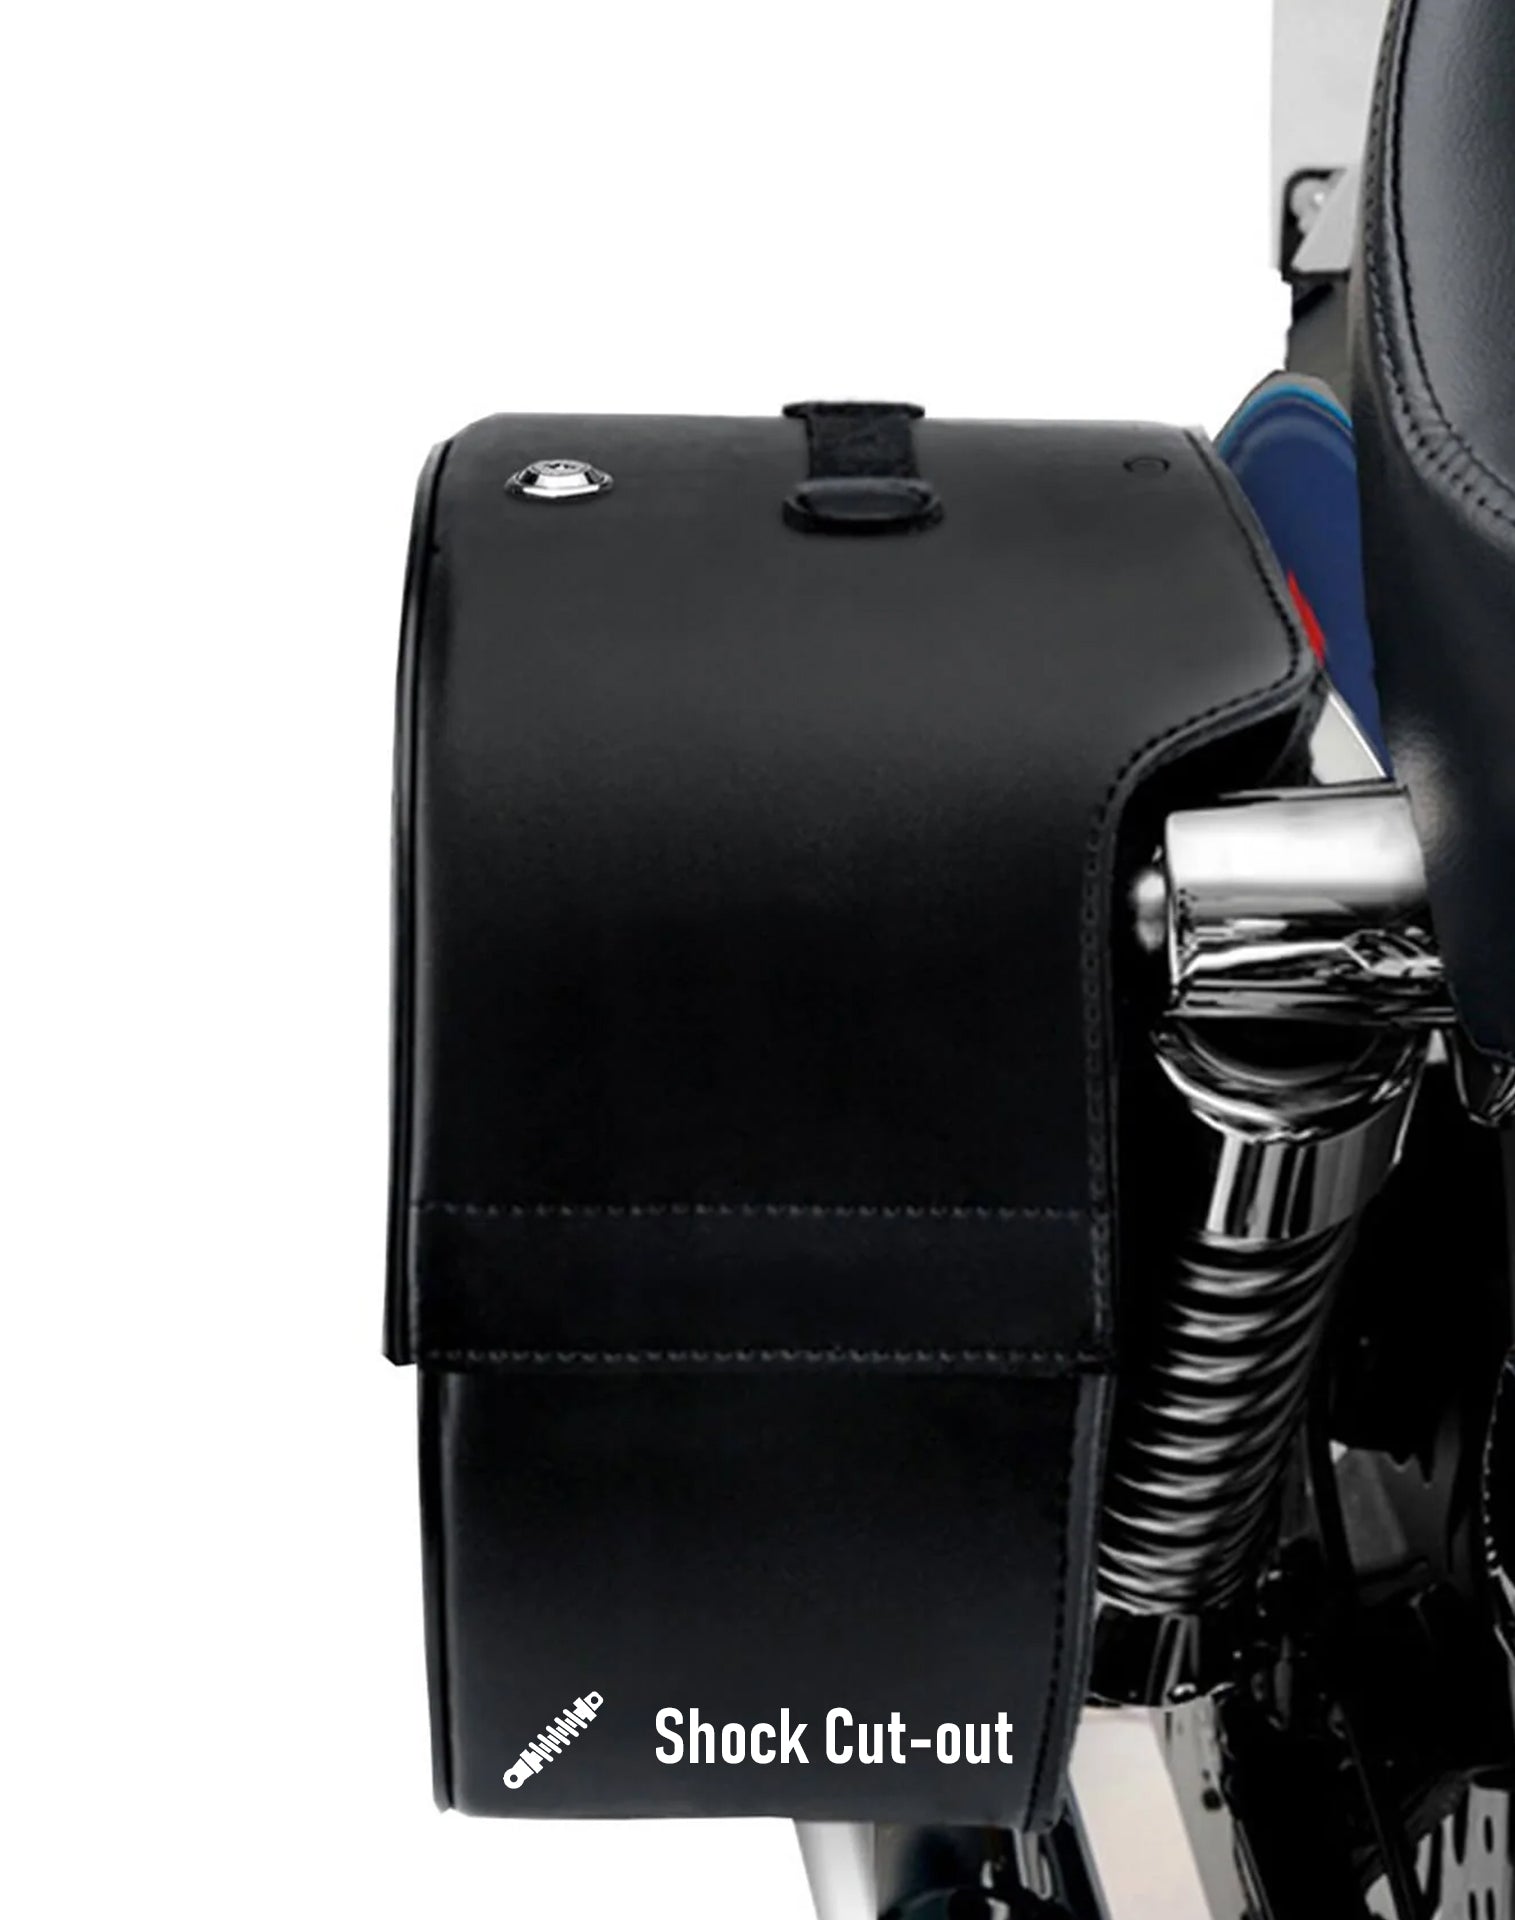 Viking Spear Shock Cut Out Large Kawasaki Mean Streak 1600 Leather Motorcycle Saddlebags are Durable